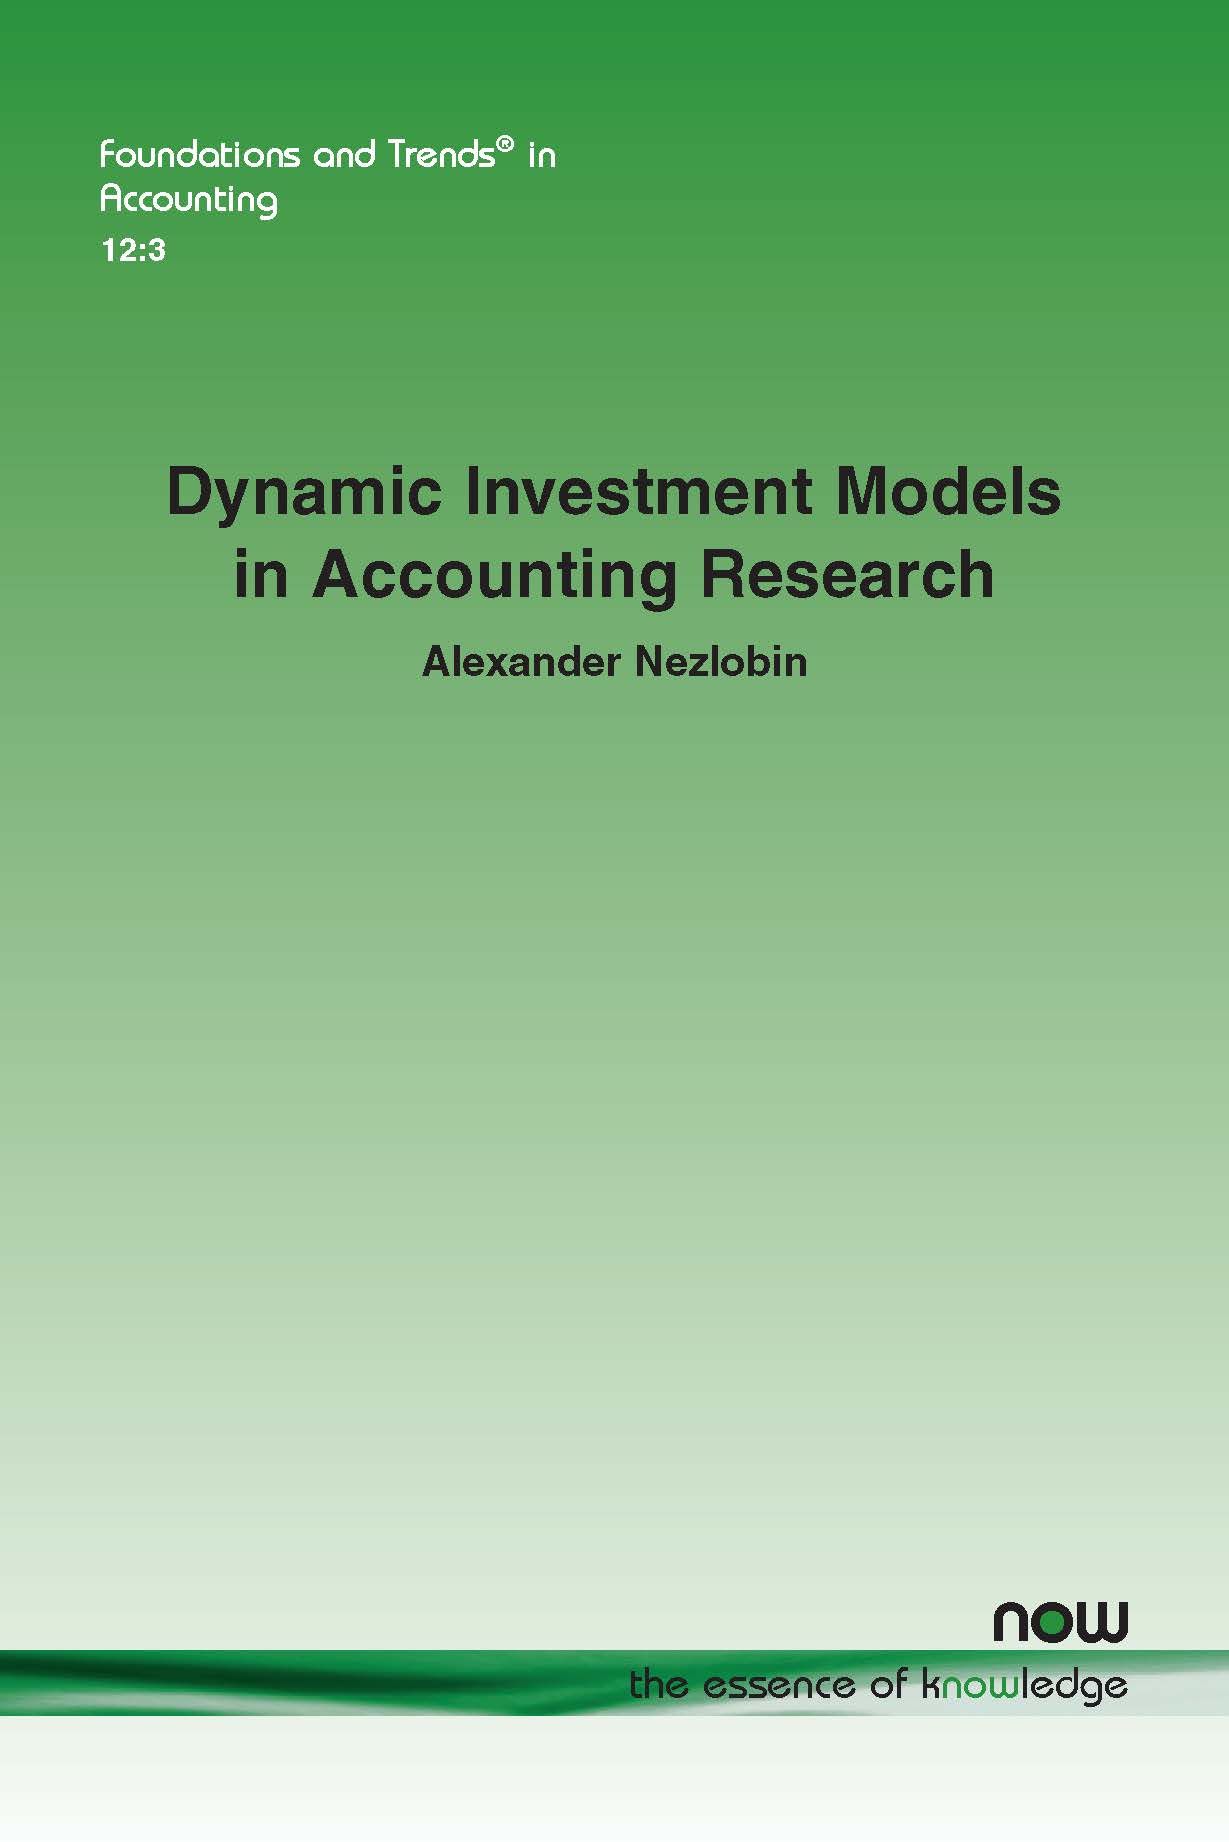 Dynamic Investment Models in Accounting Research